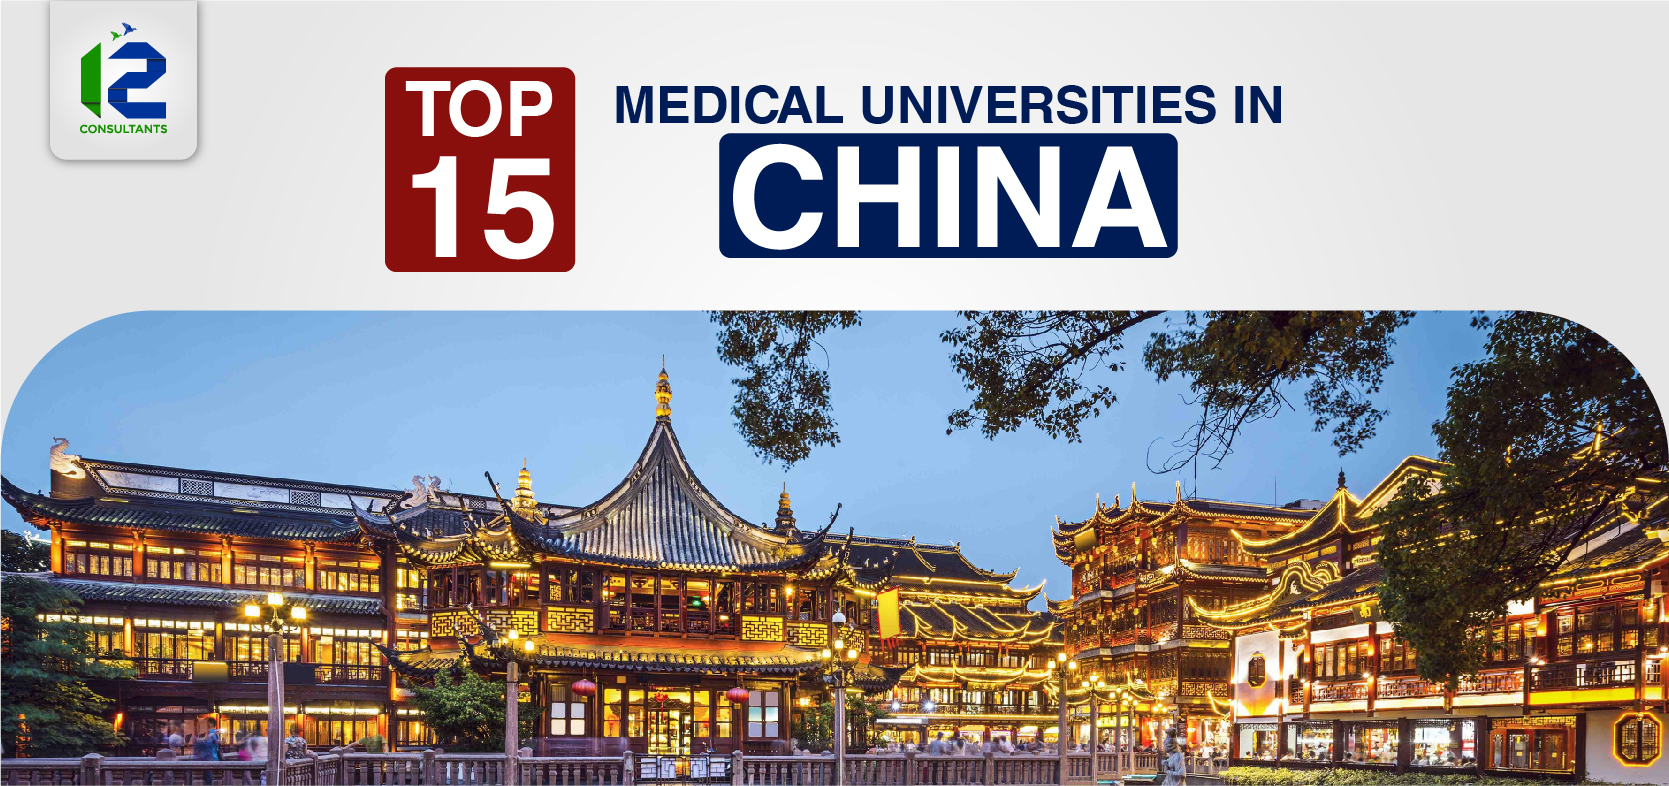 Top Medical Universities In China